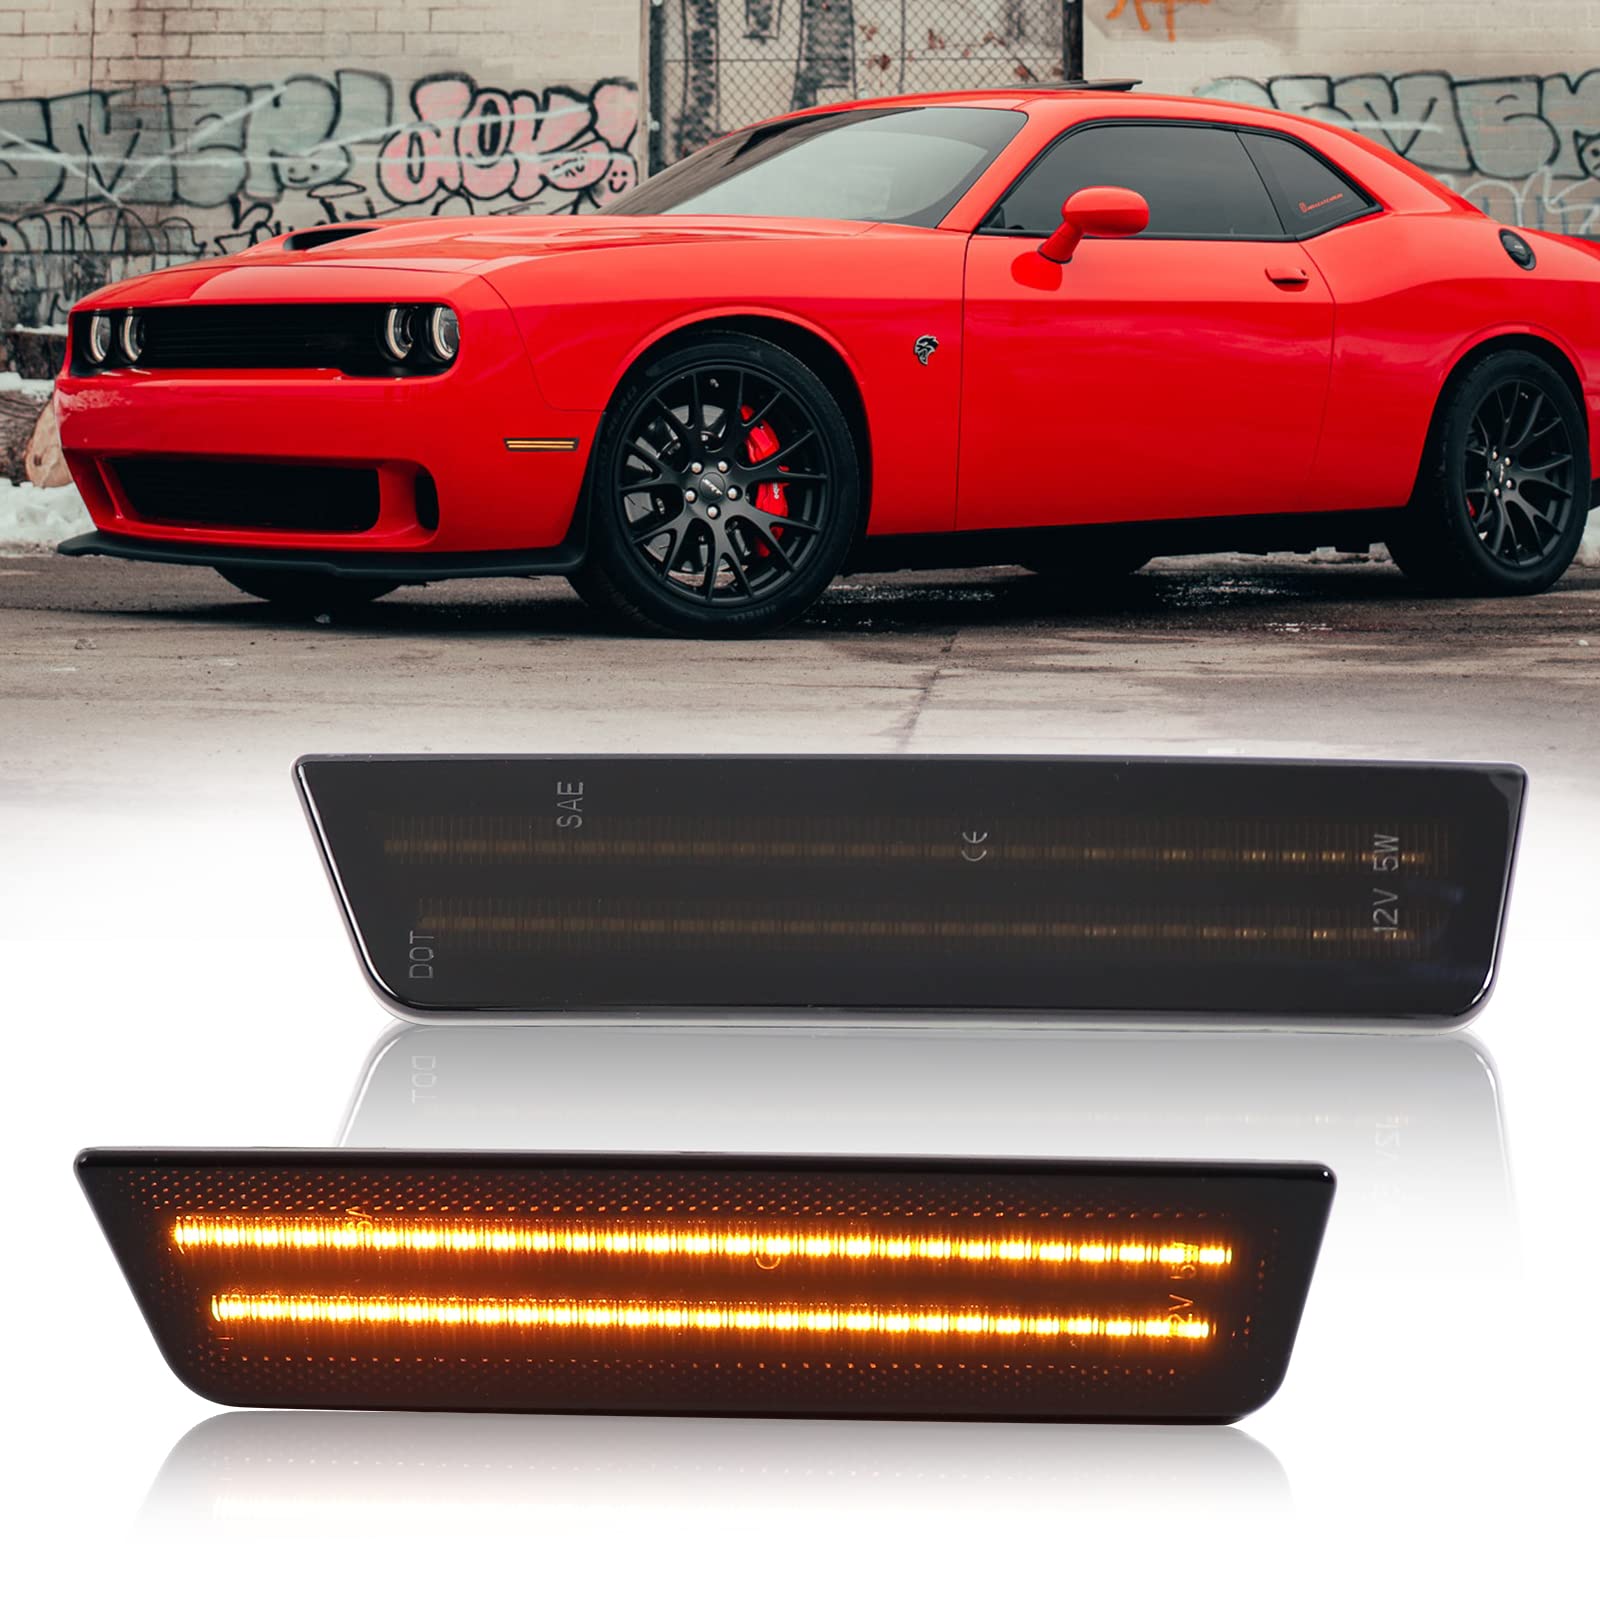 FetonAuto Smoked Lens LED Side Marker Lights Compatible with 2008-2014 Dodge Challenger and 2011-2014 Dodge Charger, Dual Row LED Front Bumper Reflector von FetonAuto